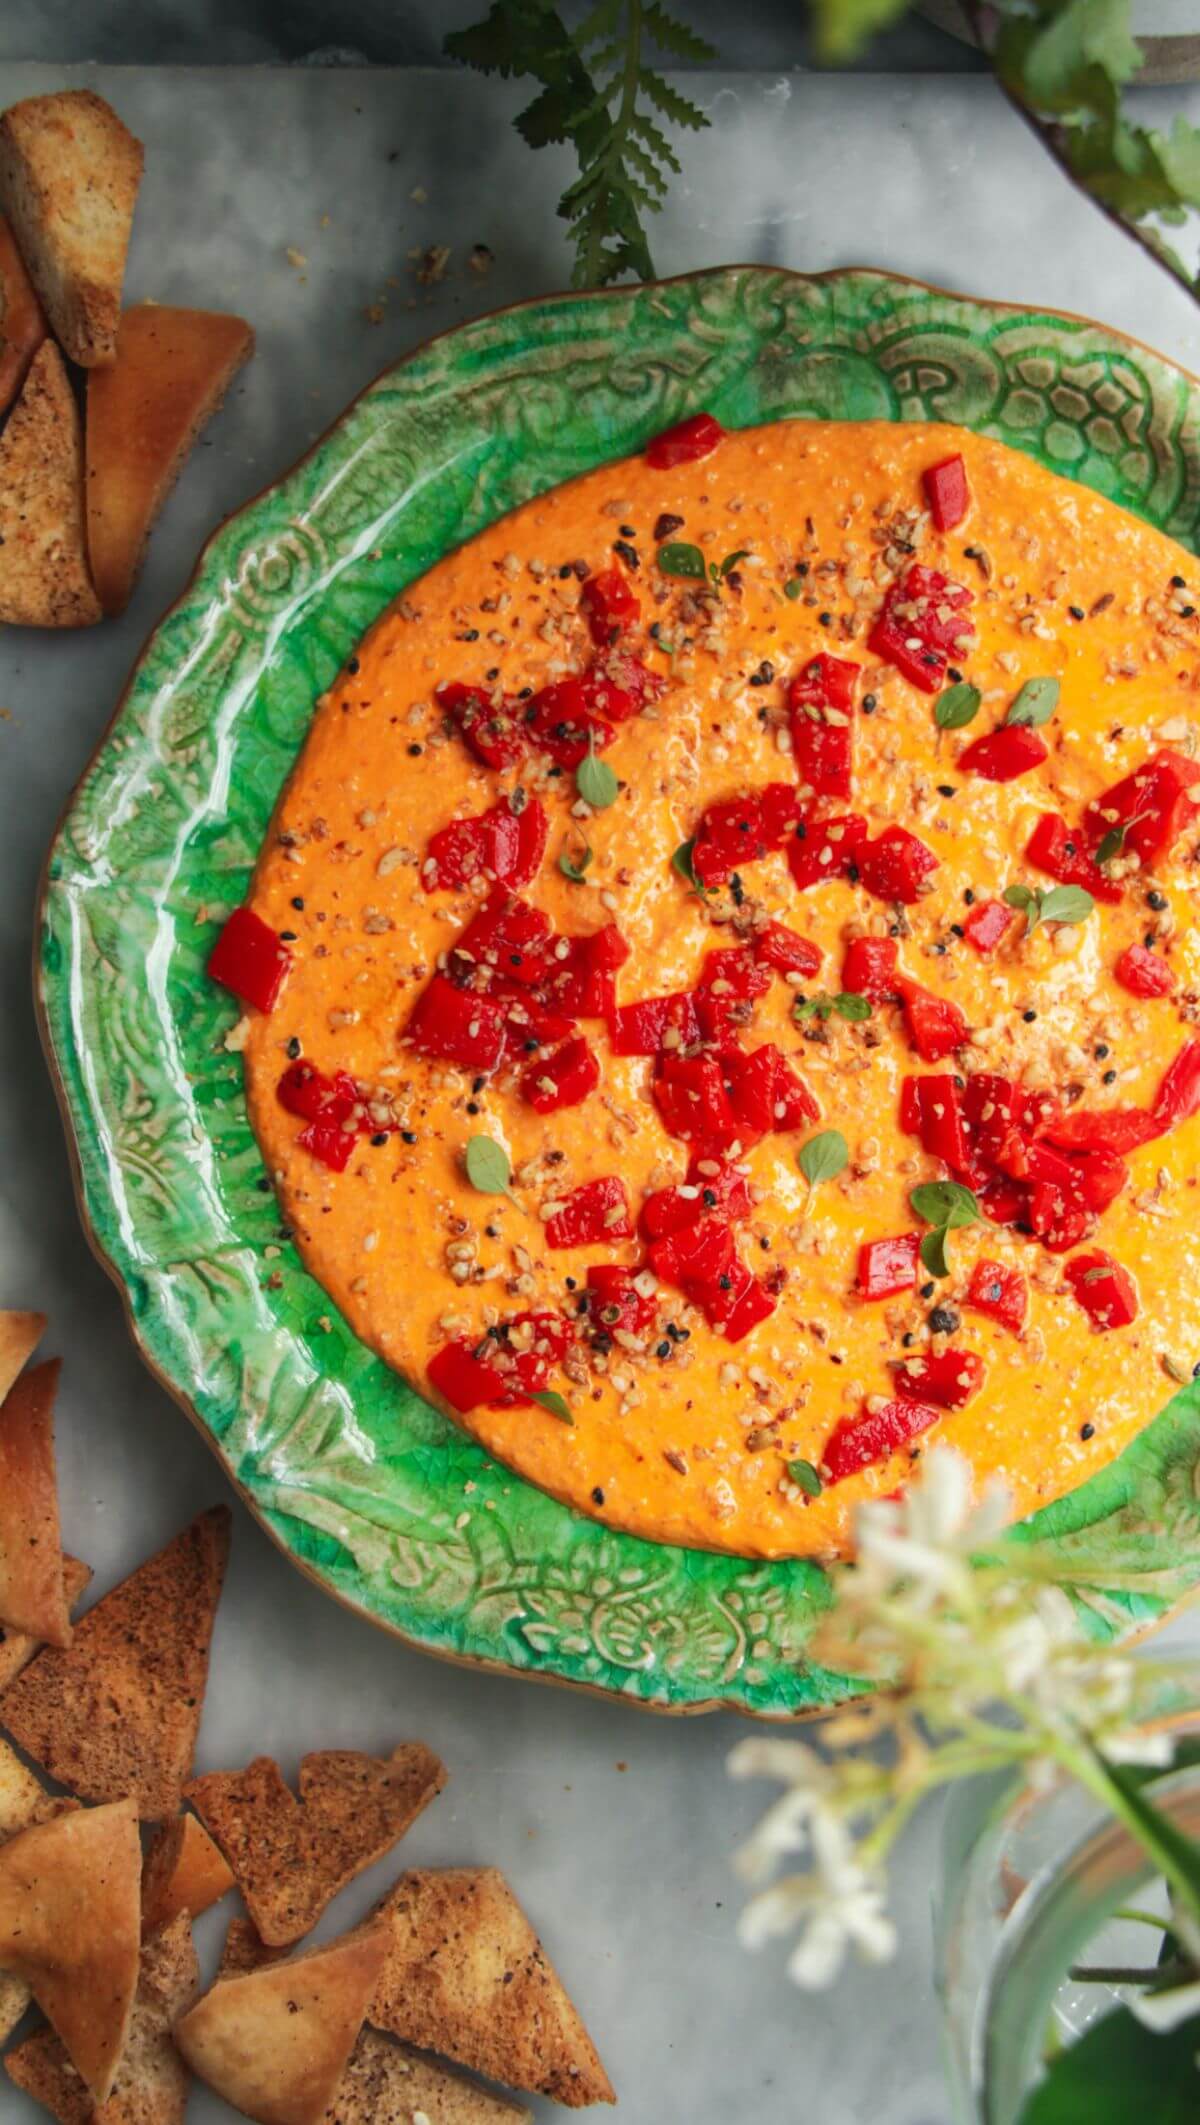 Red pepper feta dip on a small green plate with pita chips on the side.